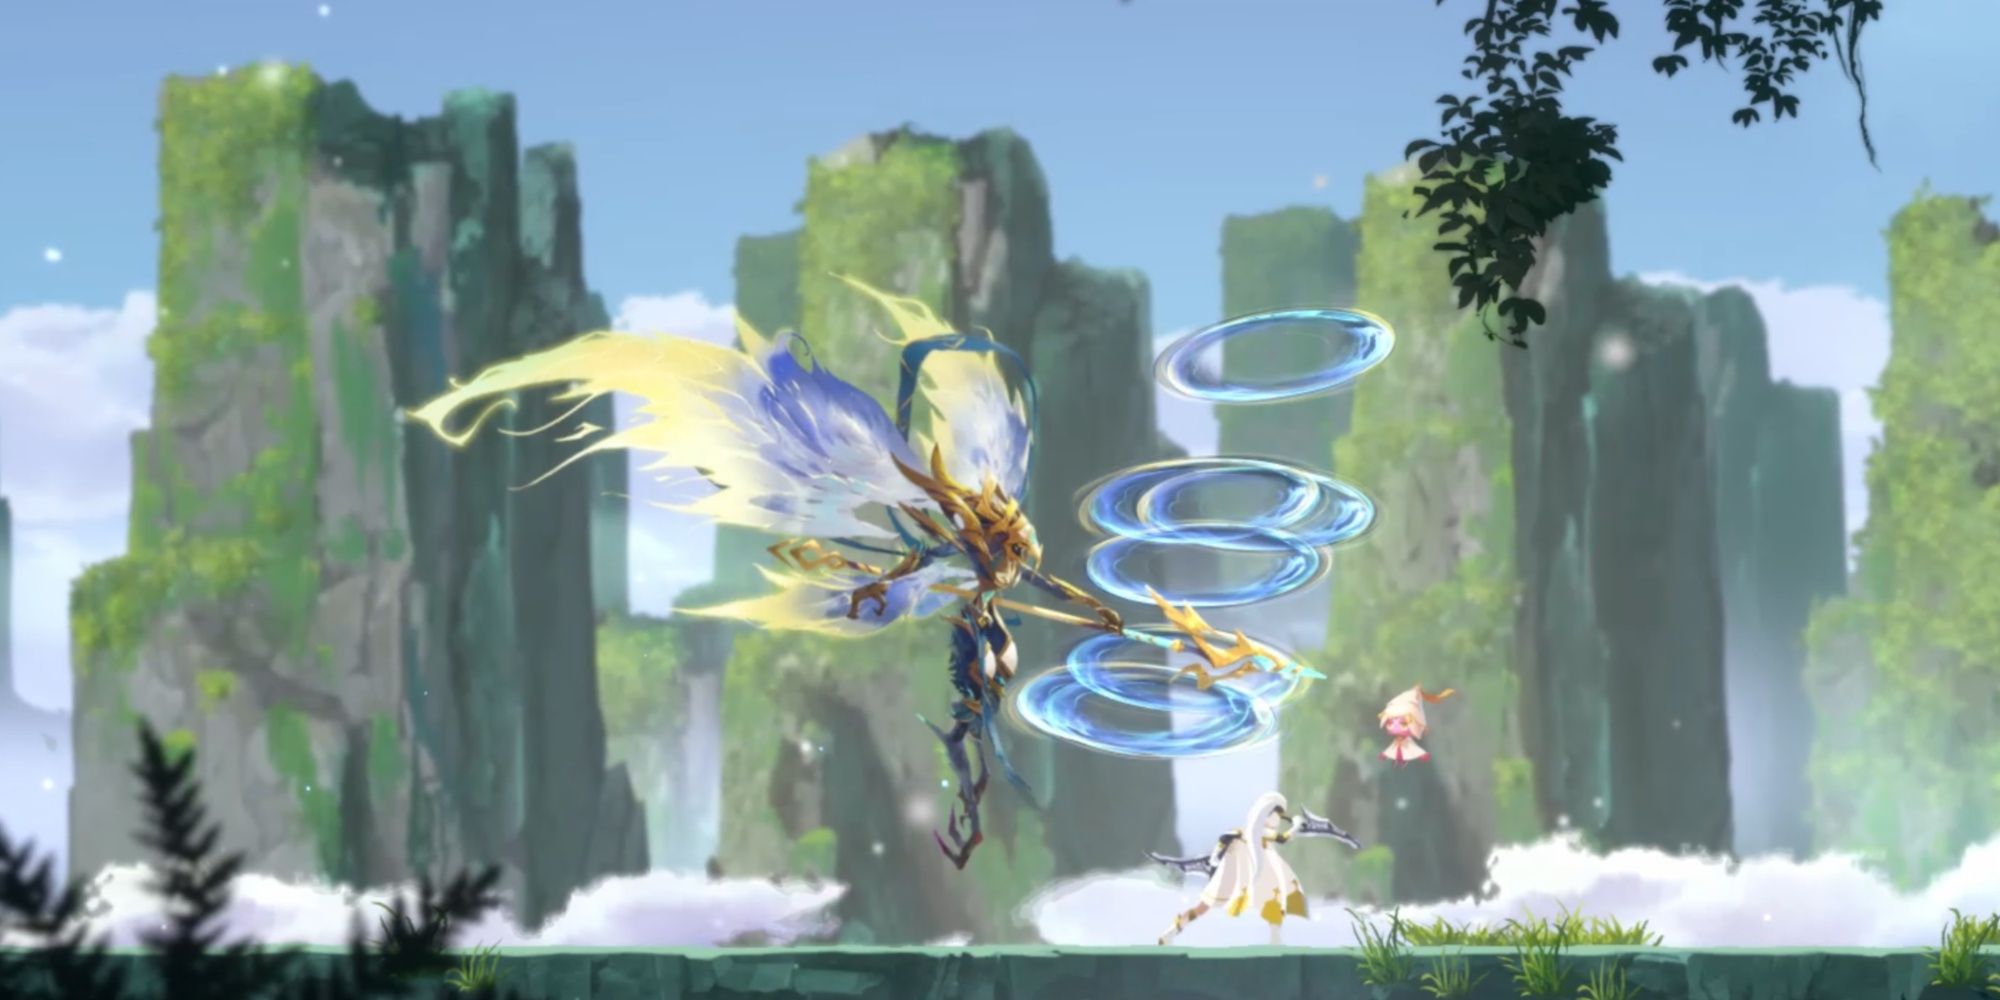 Loss, the Galefeather launching several Gale Discs sporadically in Afterimage